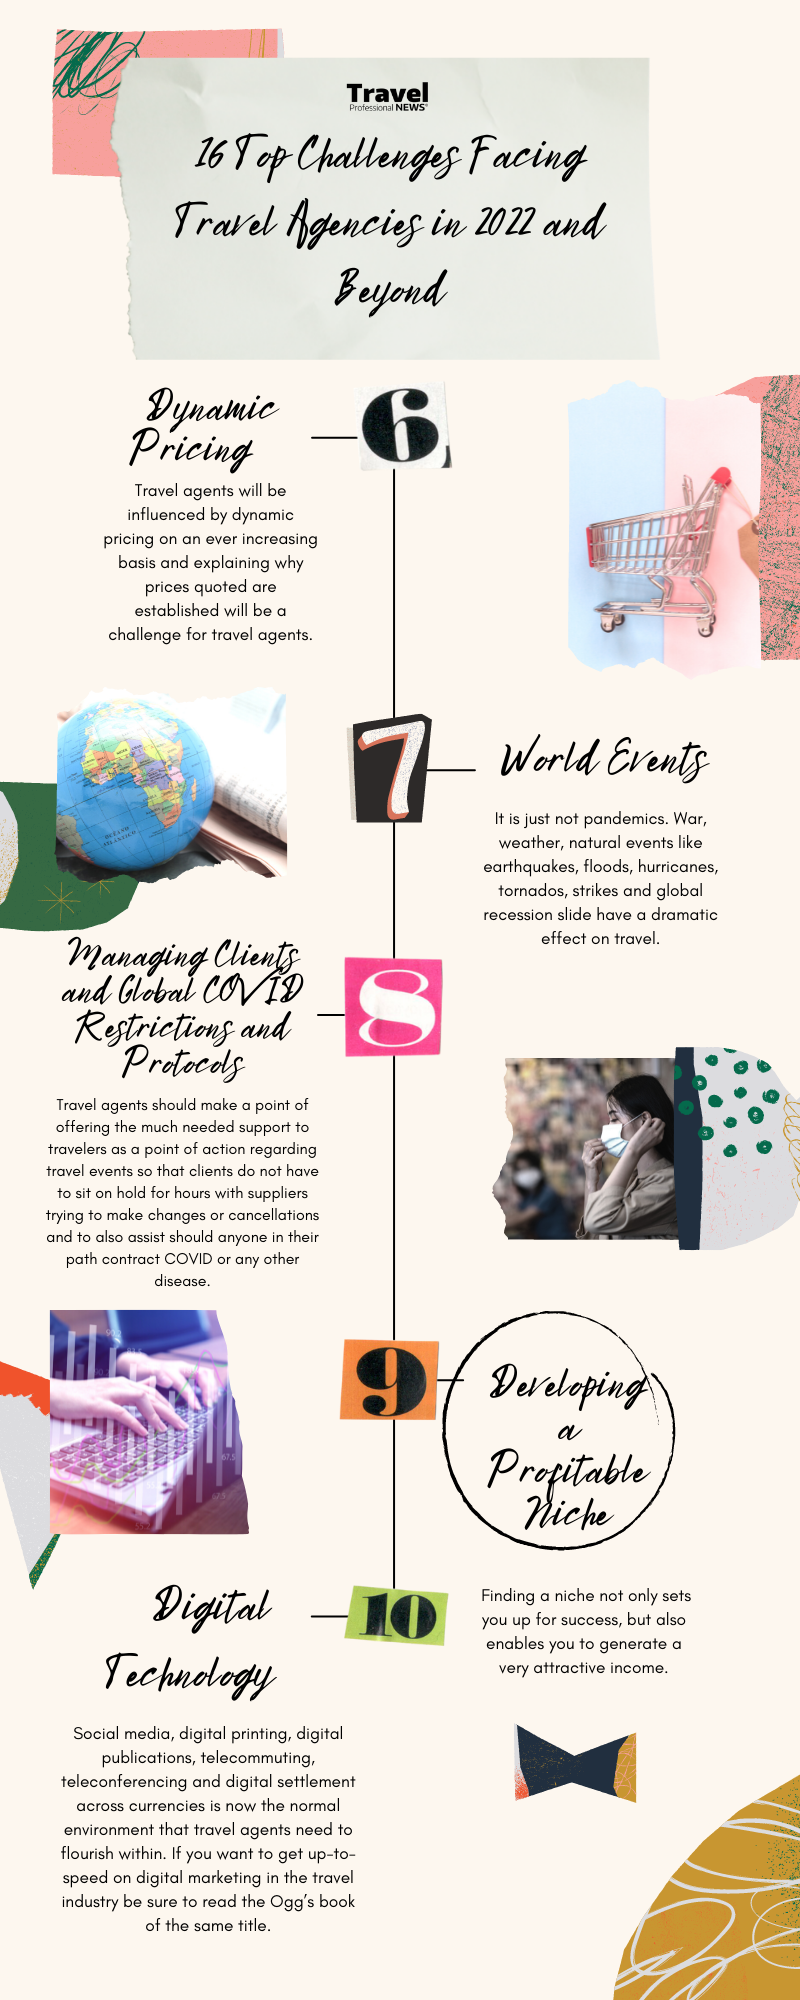 16 Top Challenges Facing Travel Agencies in 2022 and Beyond Infographic 2 - FAHTA